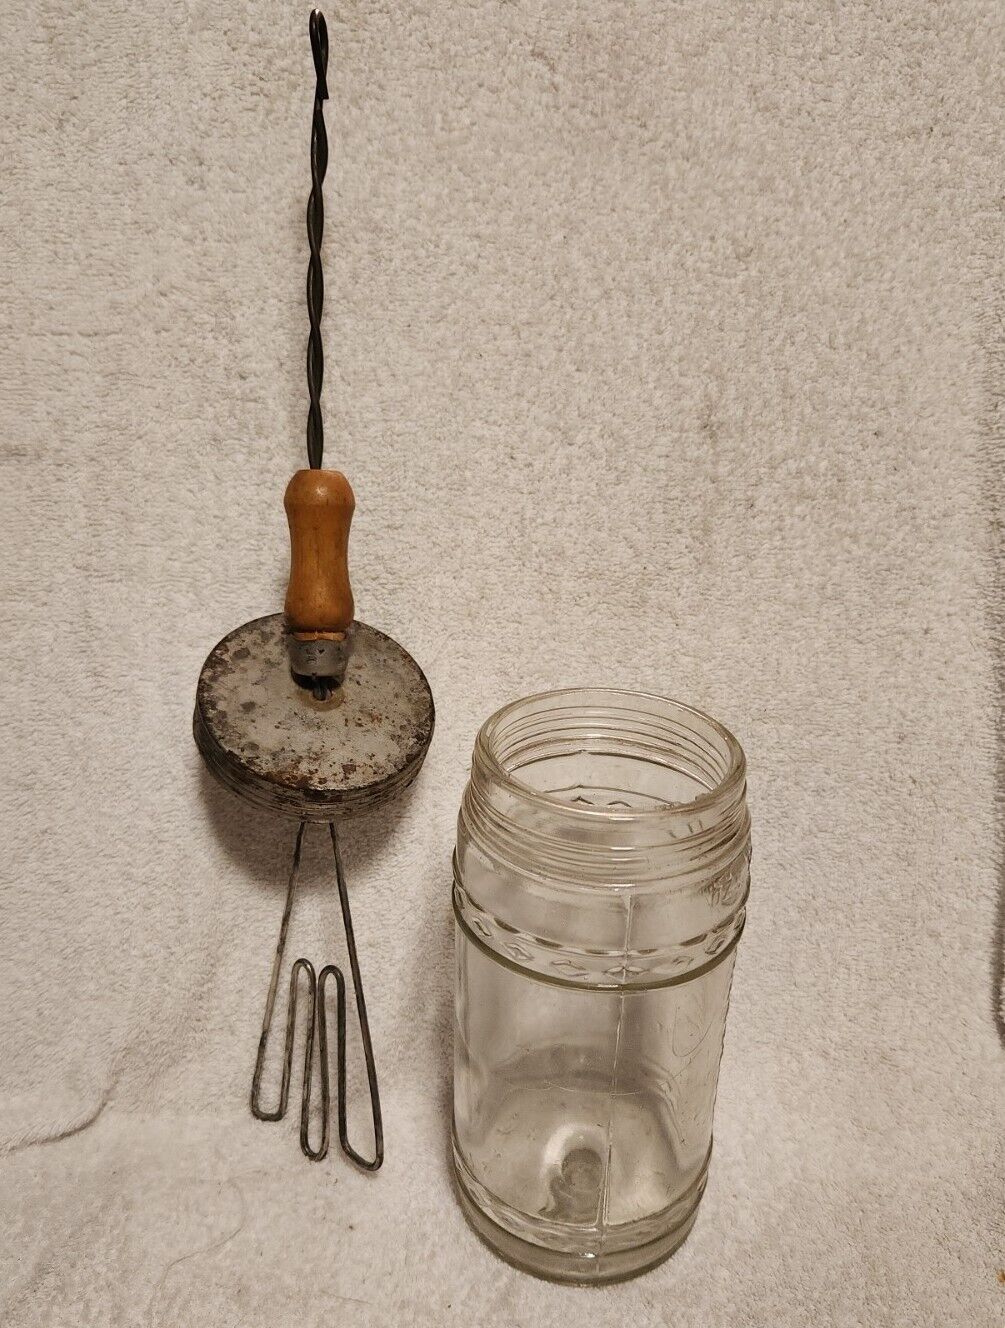 Vintage One Quart Glass Hand Mixer Patented March 30, 1915, Measurement Markings